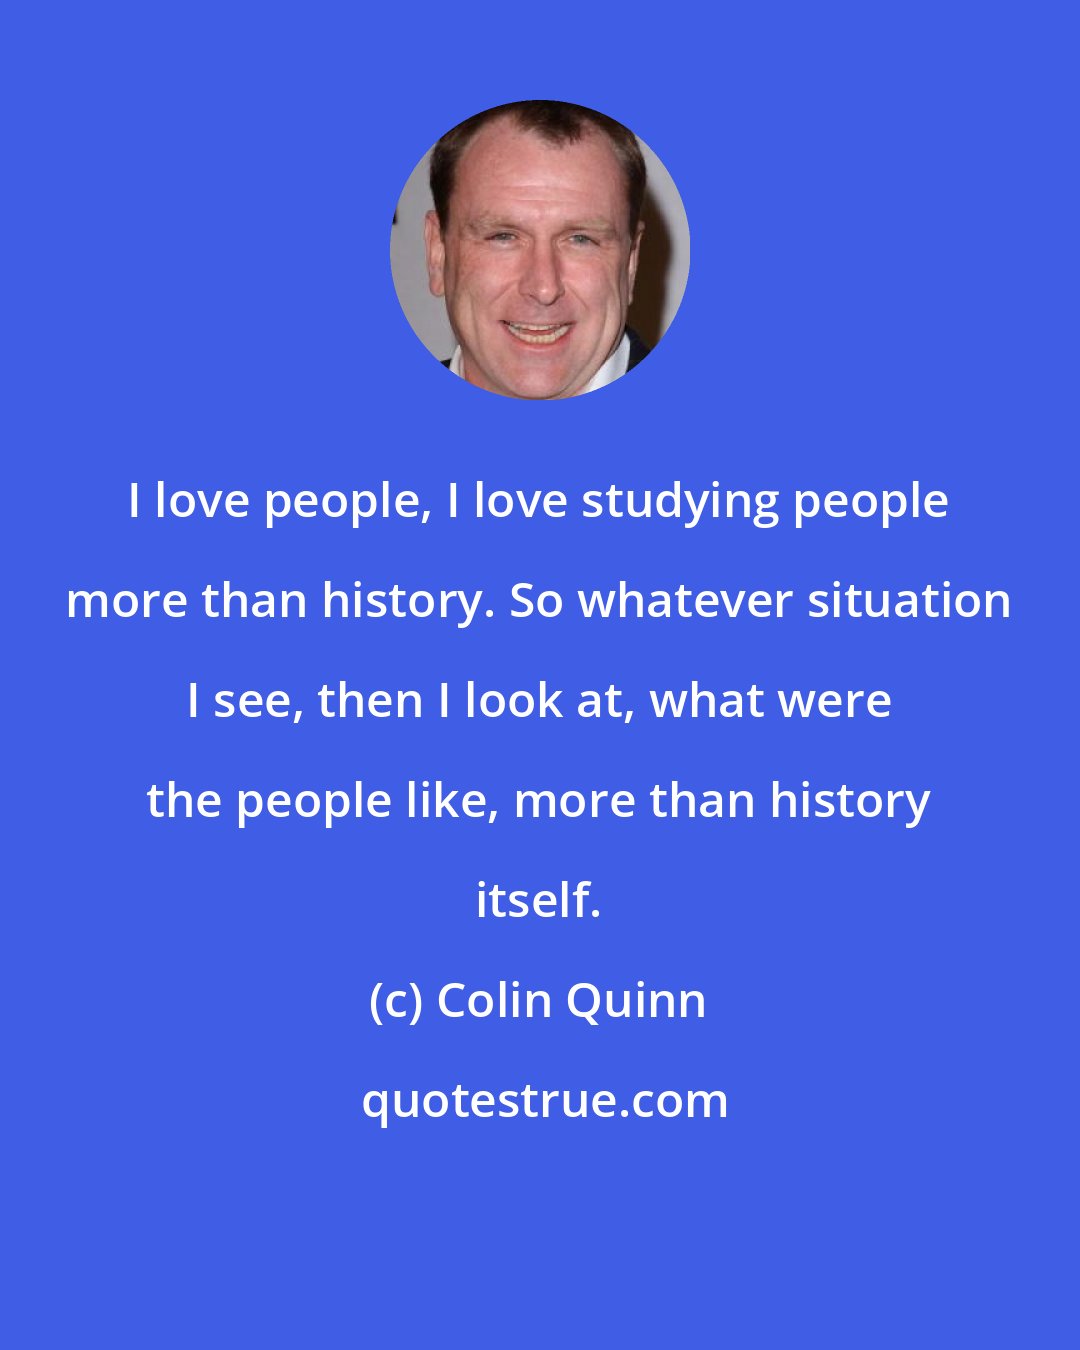 Colin Quinn: I love people, I love studying people more than history. So whatever situation I see, then I look at, what were the people like, more than history itself.